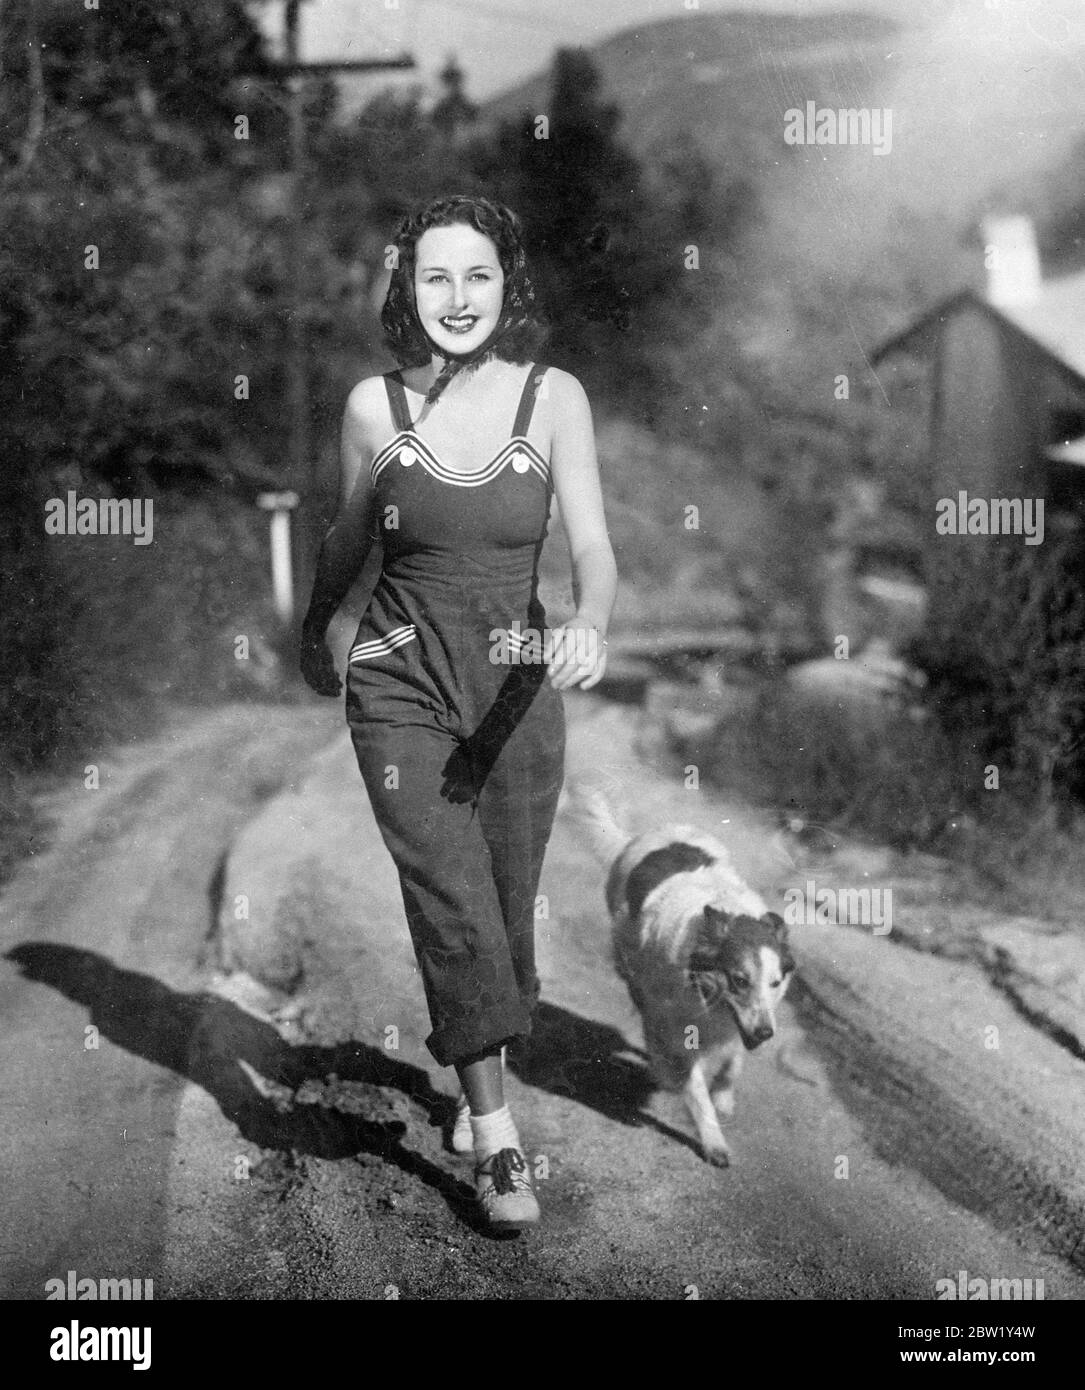 Overalls as film actress walking costume. Barbara Read, the film actress, prefers comfort when walking, exercising her dog between 'shots' of her new film Make Way for Tomorrow. Her inexpensive, but attractive overalls of the blue, set off by white striping at the neckline and pockets. Stock Photo